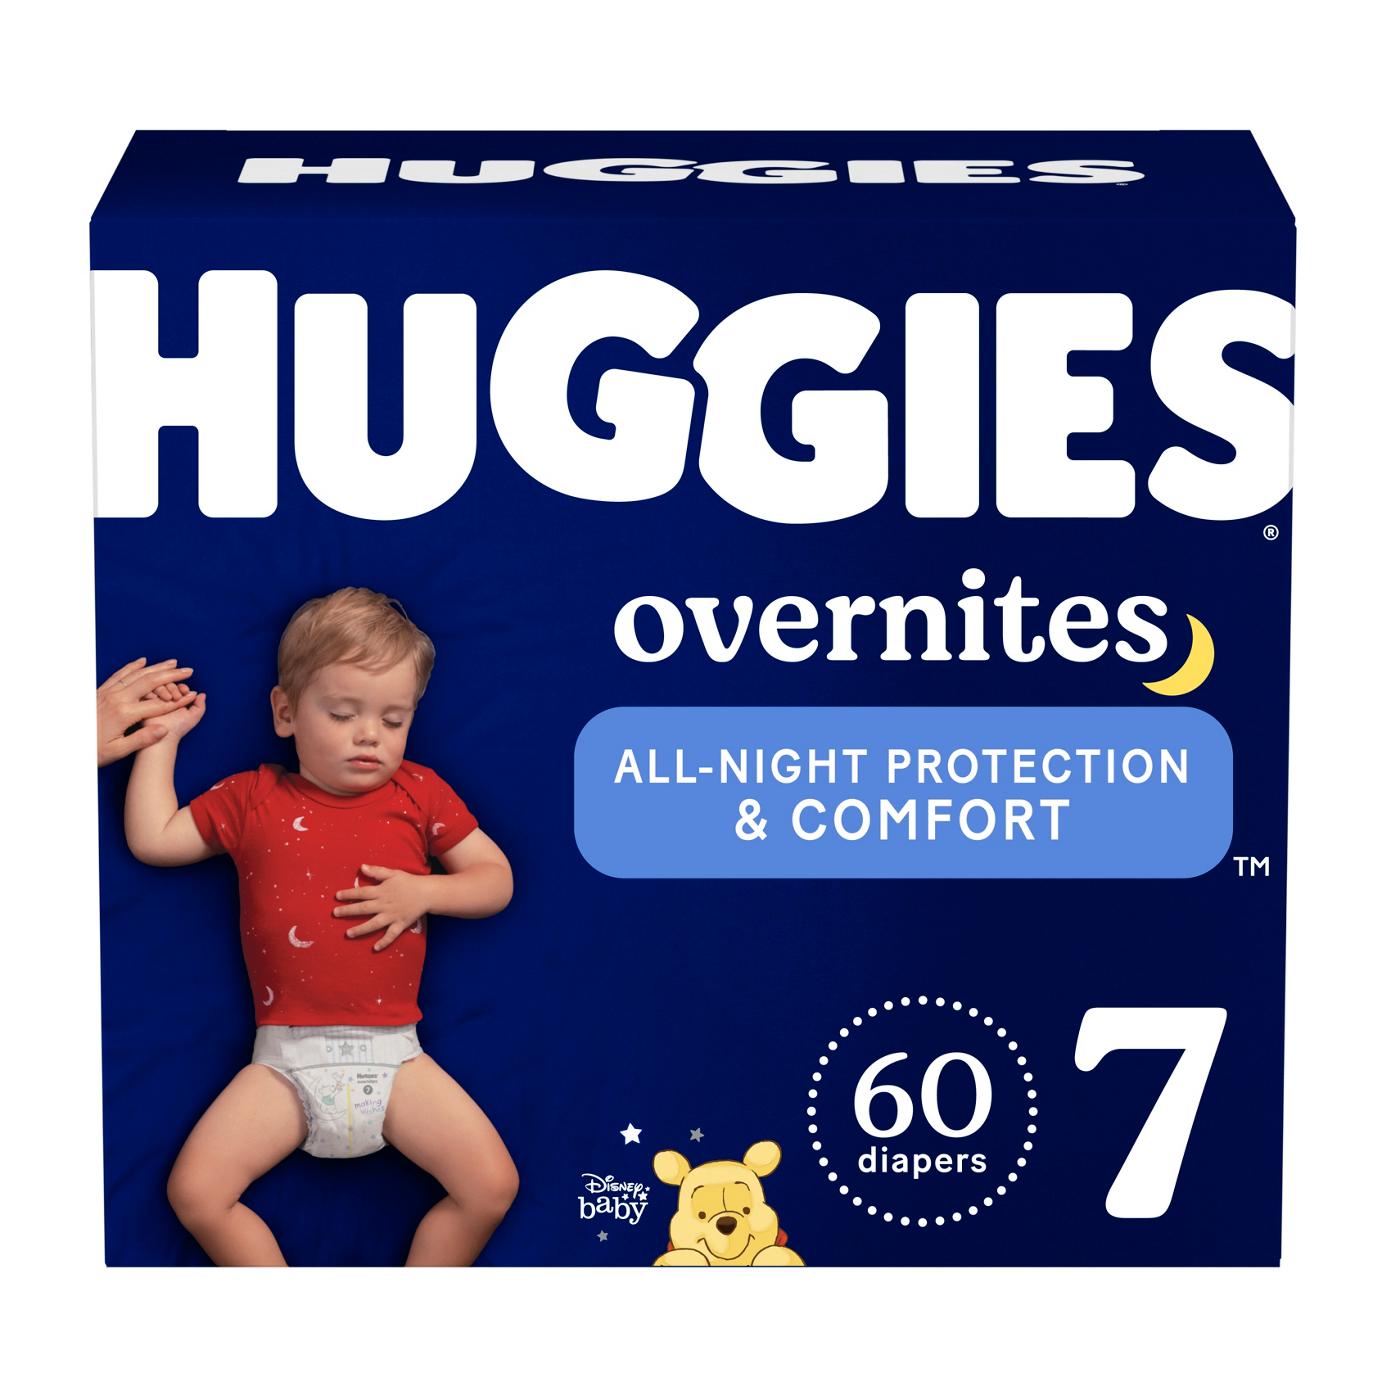 Huggies Overnites Nighttime Baby Diapers - Size 7; image 1 of 2